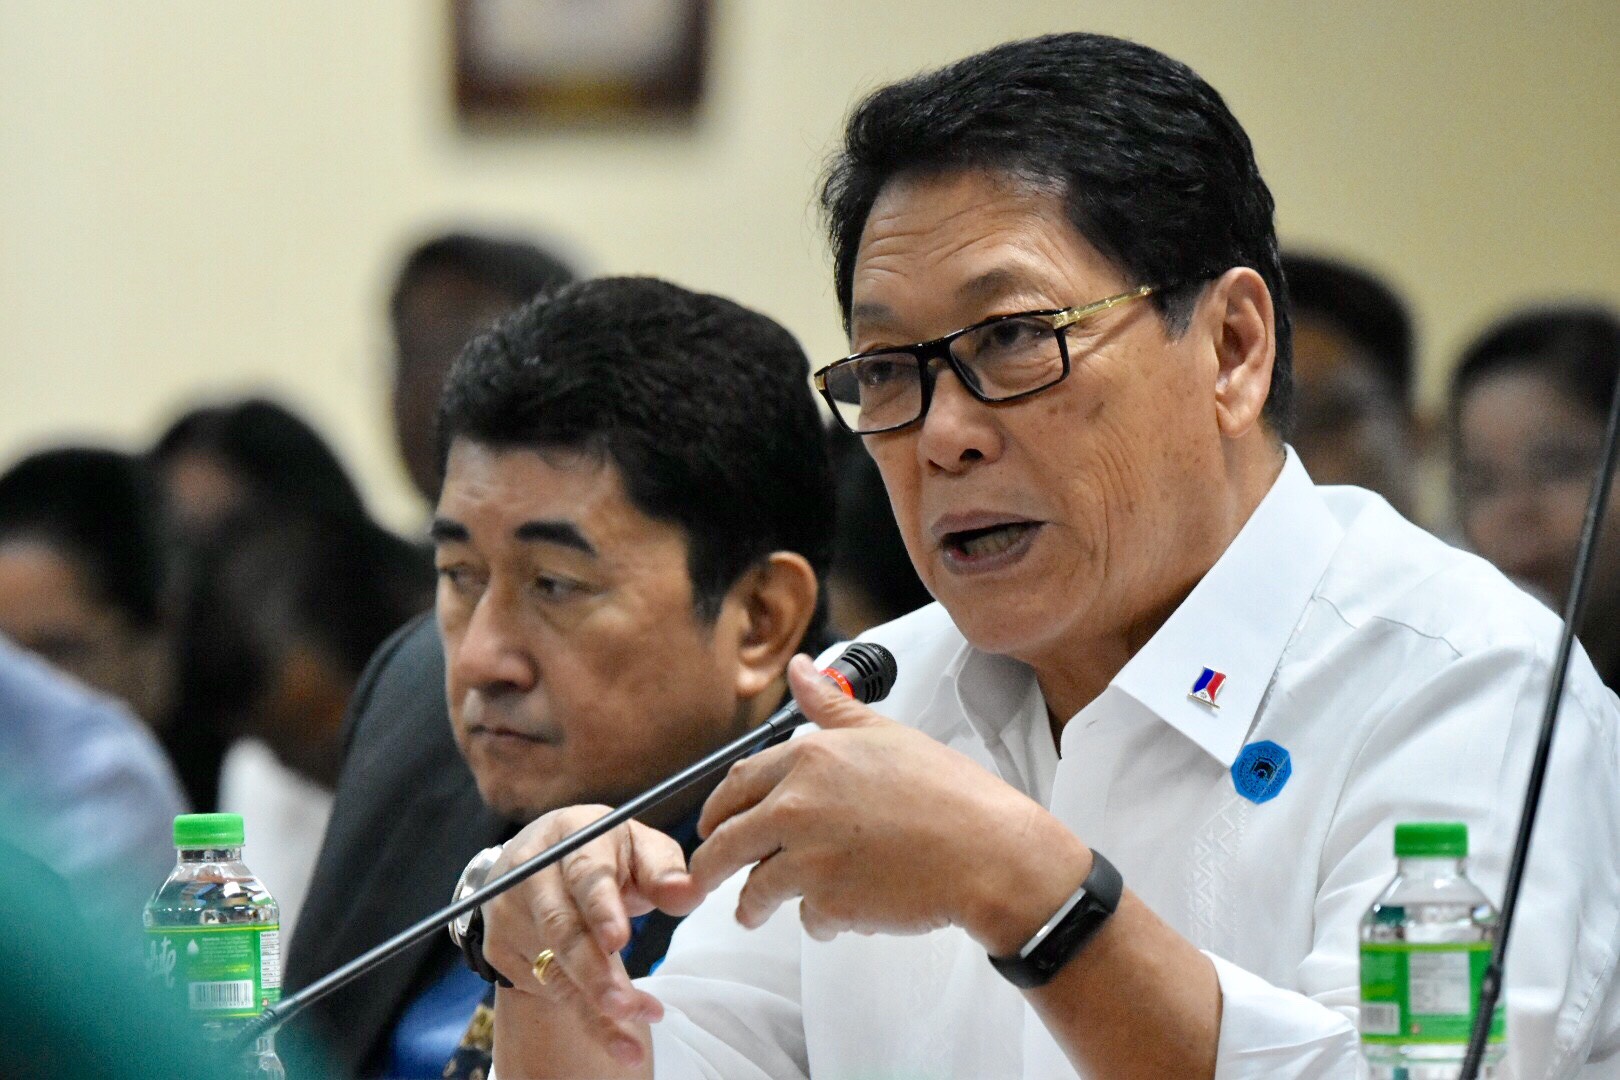 WORKERS' PLIGHT. Labor Secretary Silvestre Bello III gives updates on the welfare of overseas Filipino workers at a Senate hearing on May 23, 2018. Photo by Angie de Silva/Rappler  